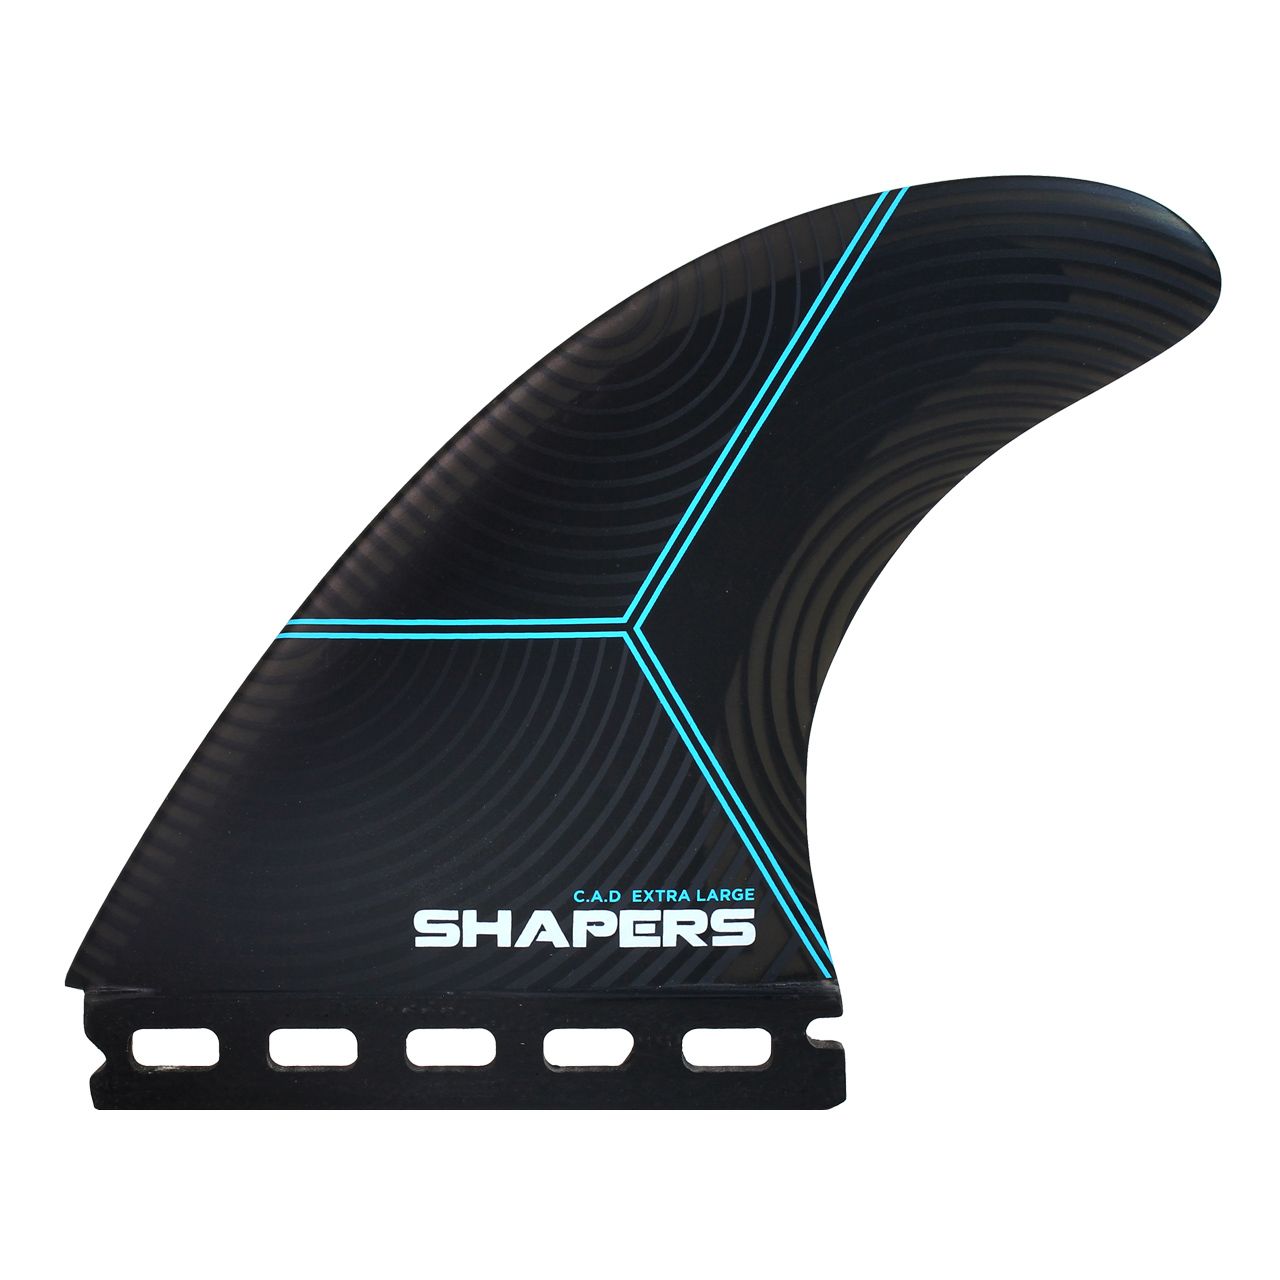 SHAPERS C.A.D XTRA LARGE 3-FIN SINGLE TAB BASE – Freeride Surf and